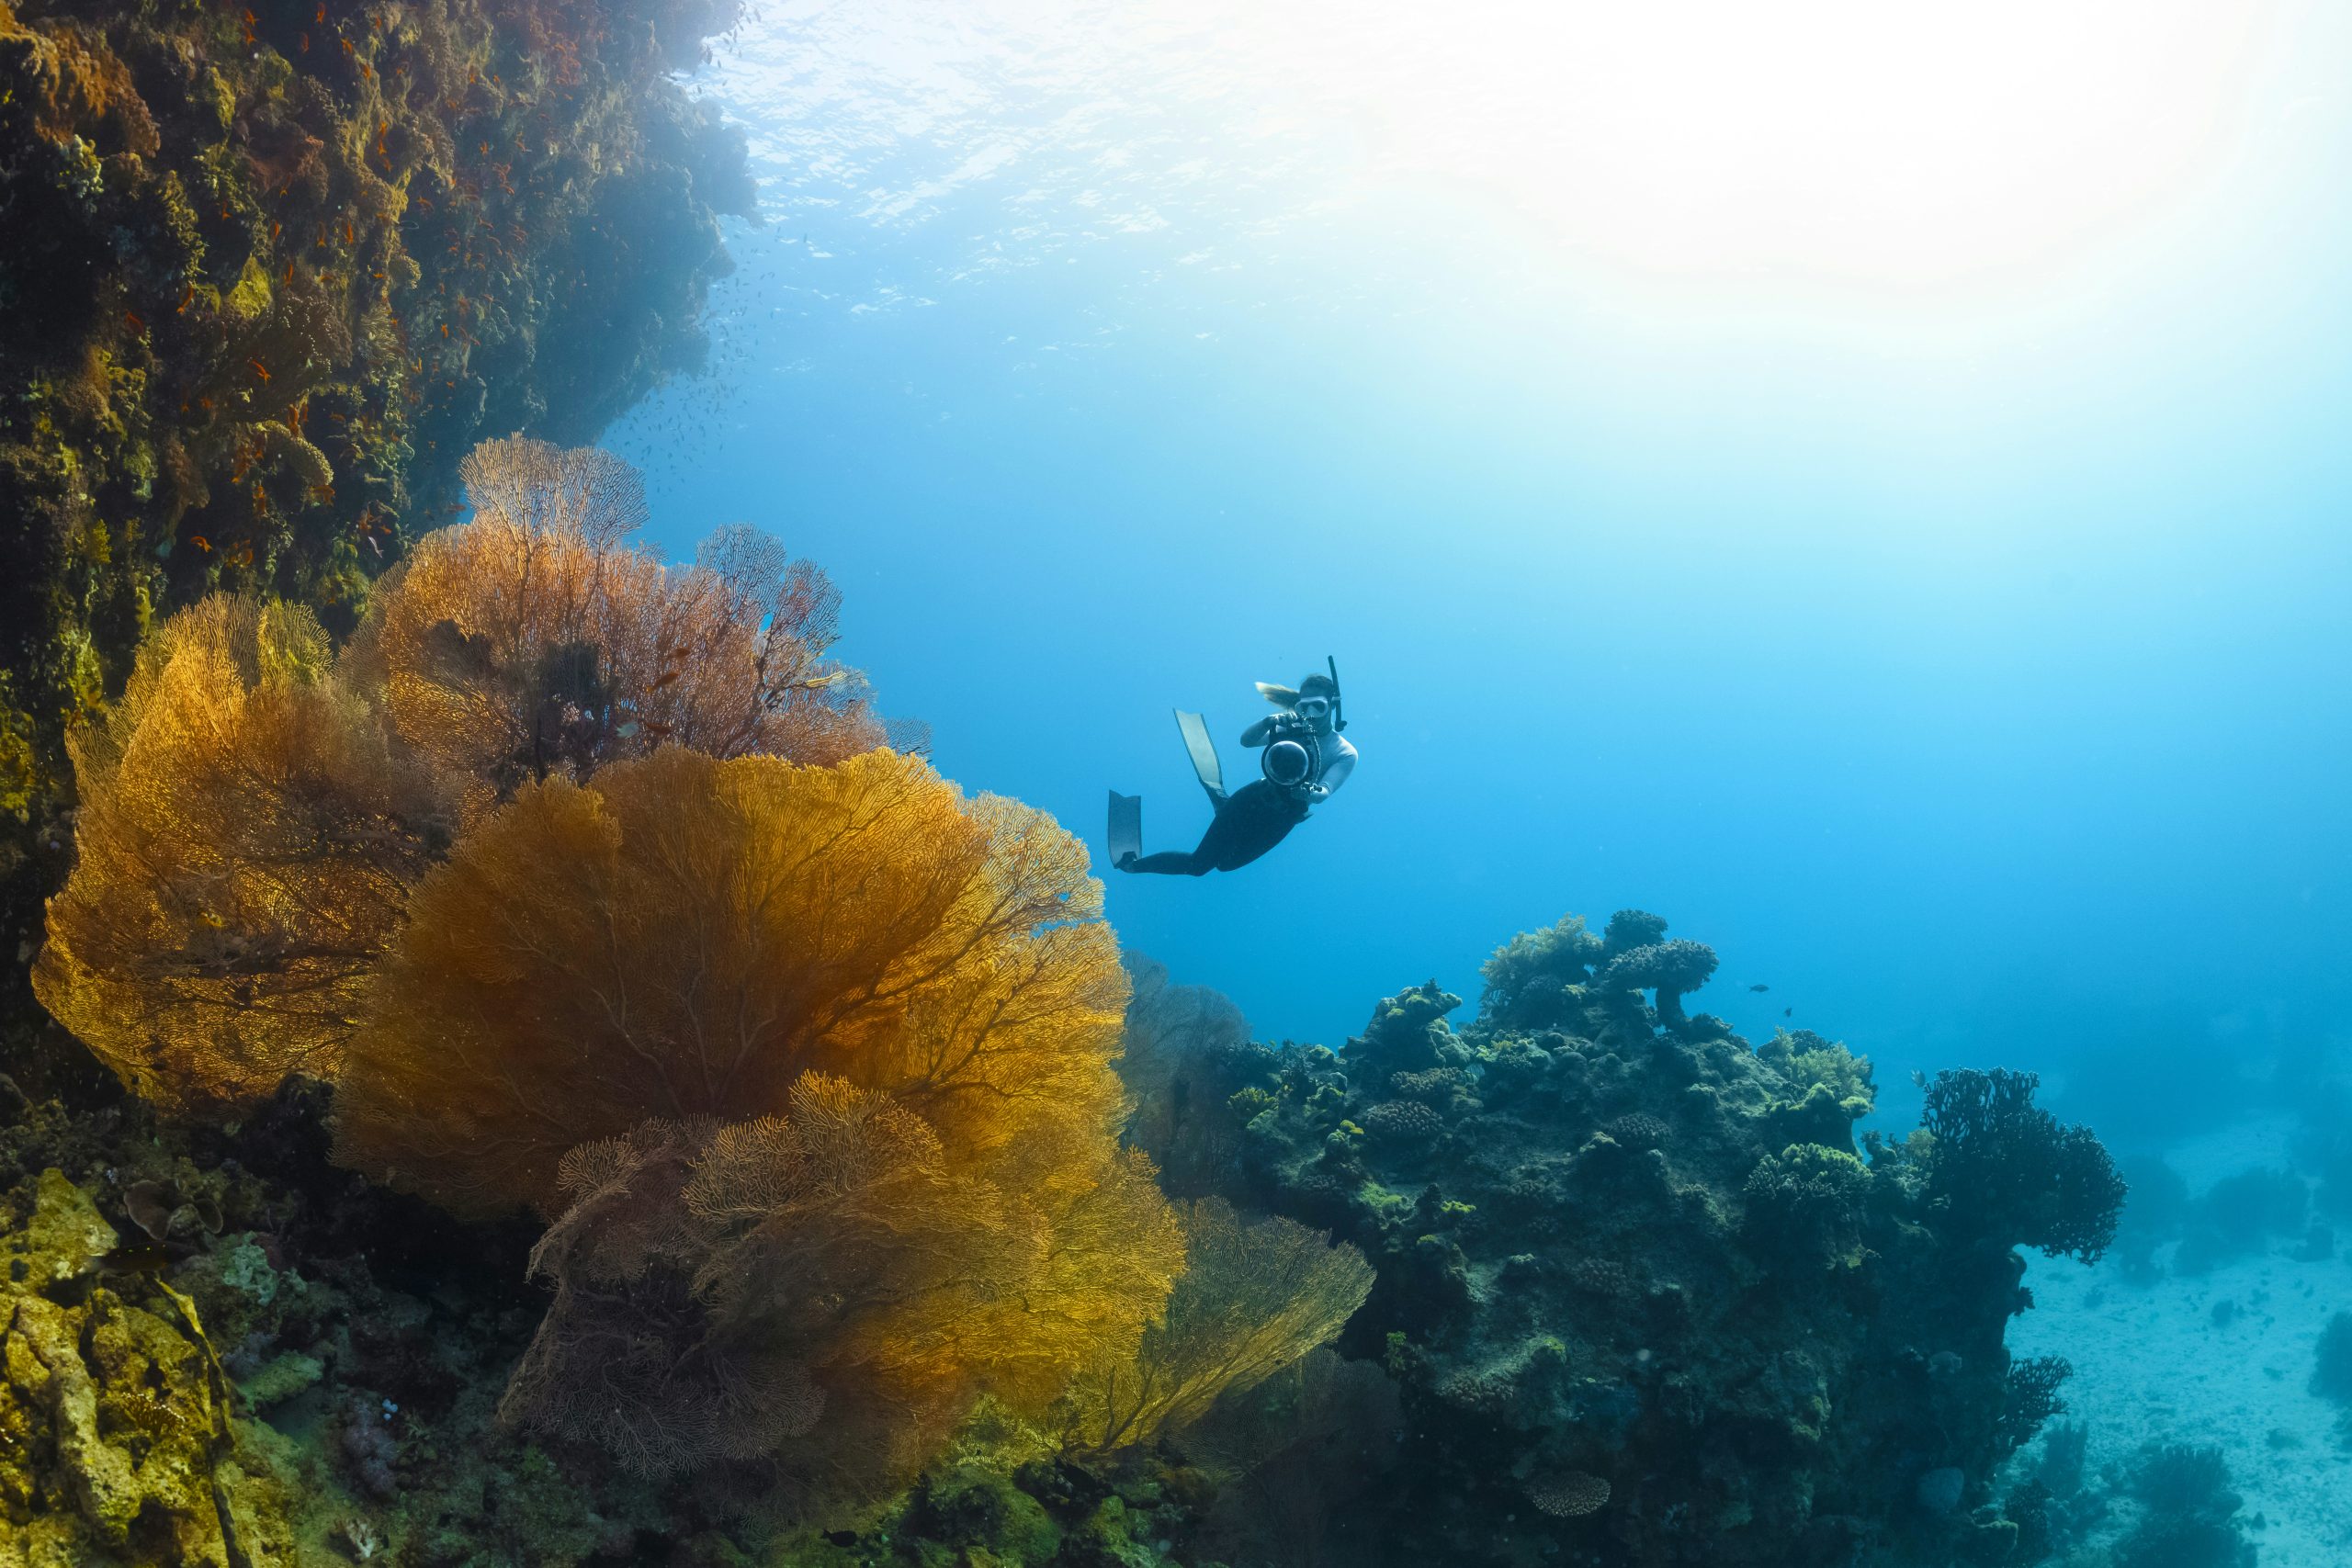 explore the wonders of the deep with our underwater adventures. dive into a world of stunning marine life and thrilling experiences beneath the waves.